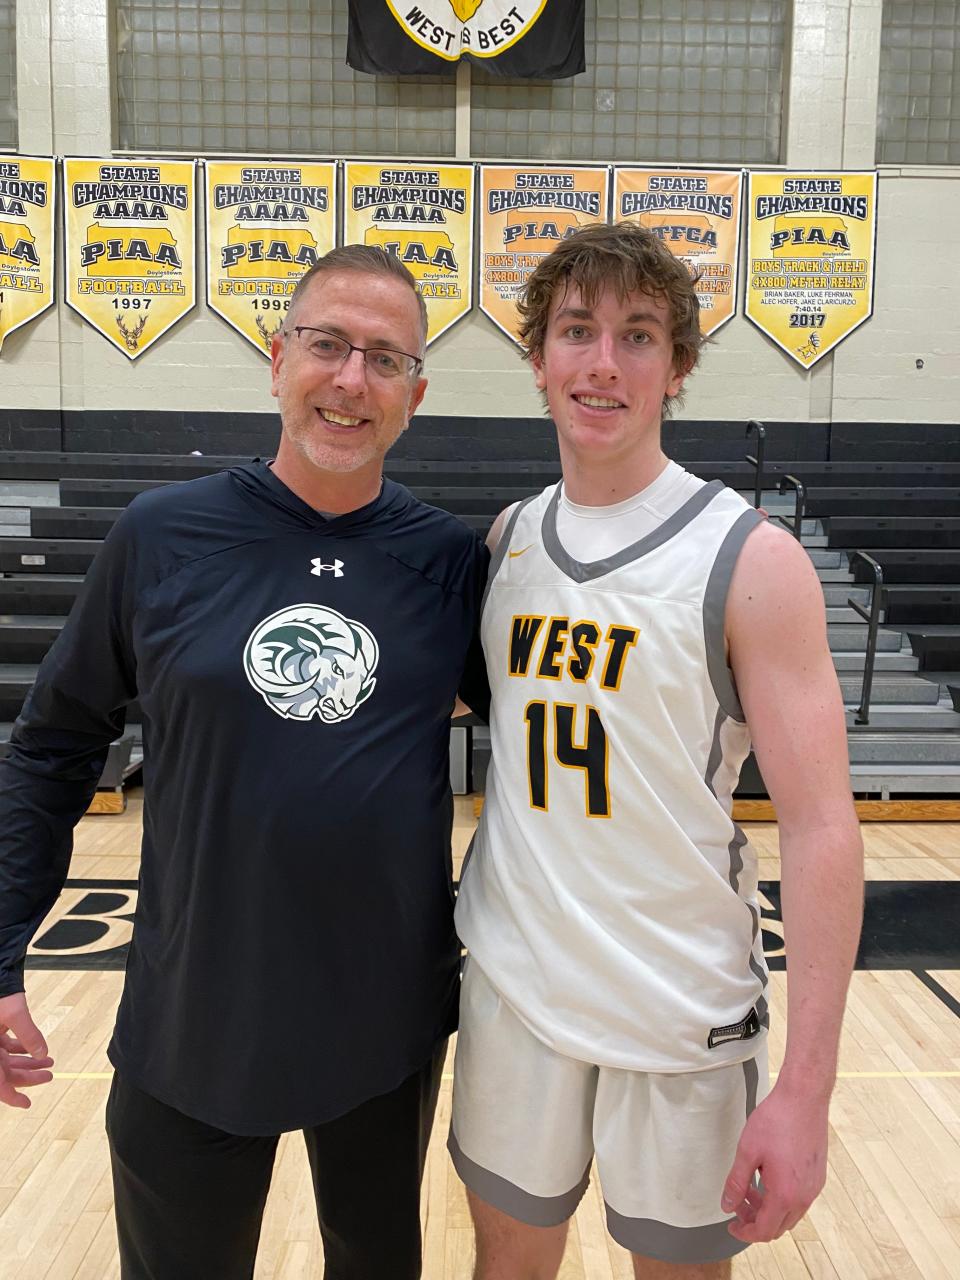 Stephen Cashman, the Pennridge principal, and son Charlie, a Central Bucks West senior, pose after a January 24 game against Central Bucks East.